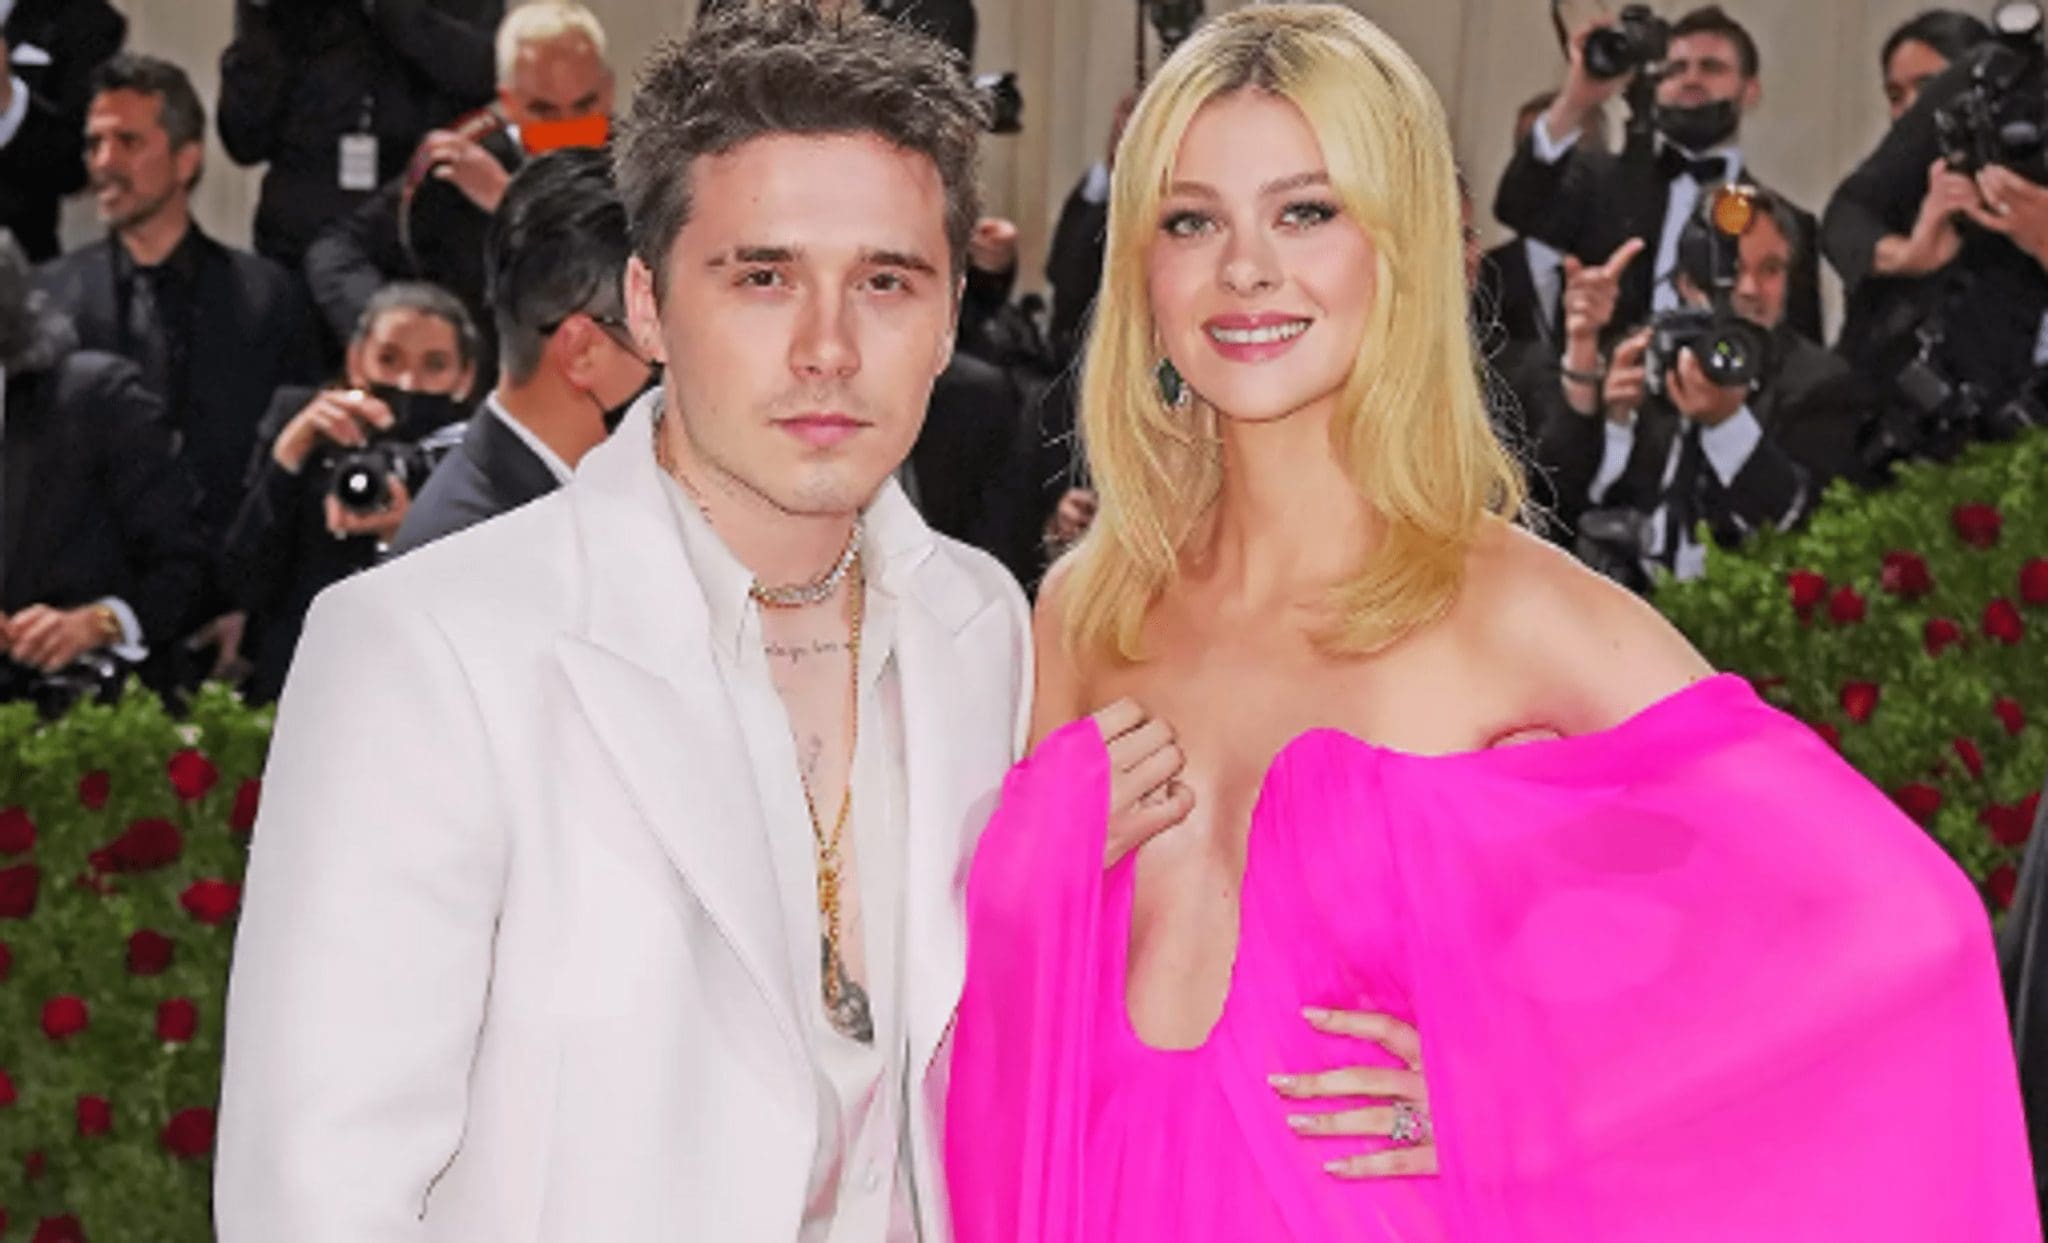 Nicola Peltz reveals Brooklyn Beckham' felt tension to please' as she searched for herself